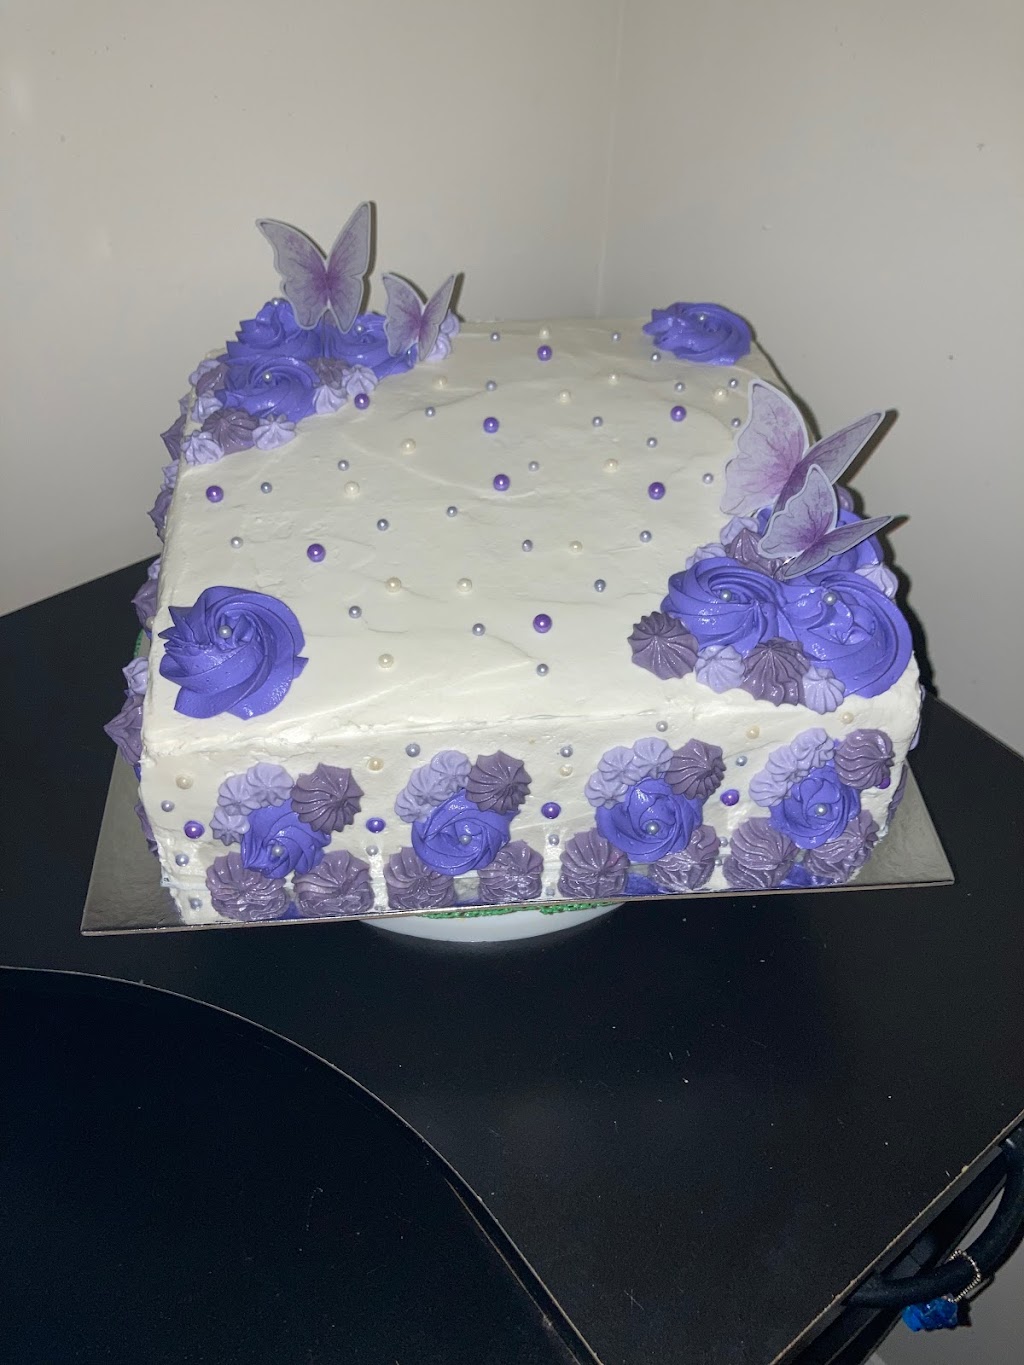 Tasty Cakes and Creations LLC | 32 Old Village Ln, Trumbull, CT 06611 | Phone: (203) 895-3000